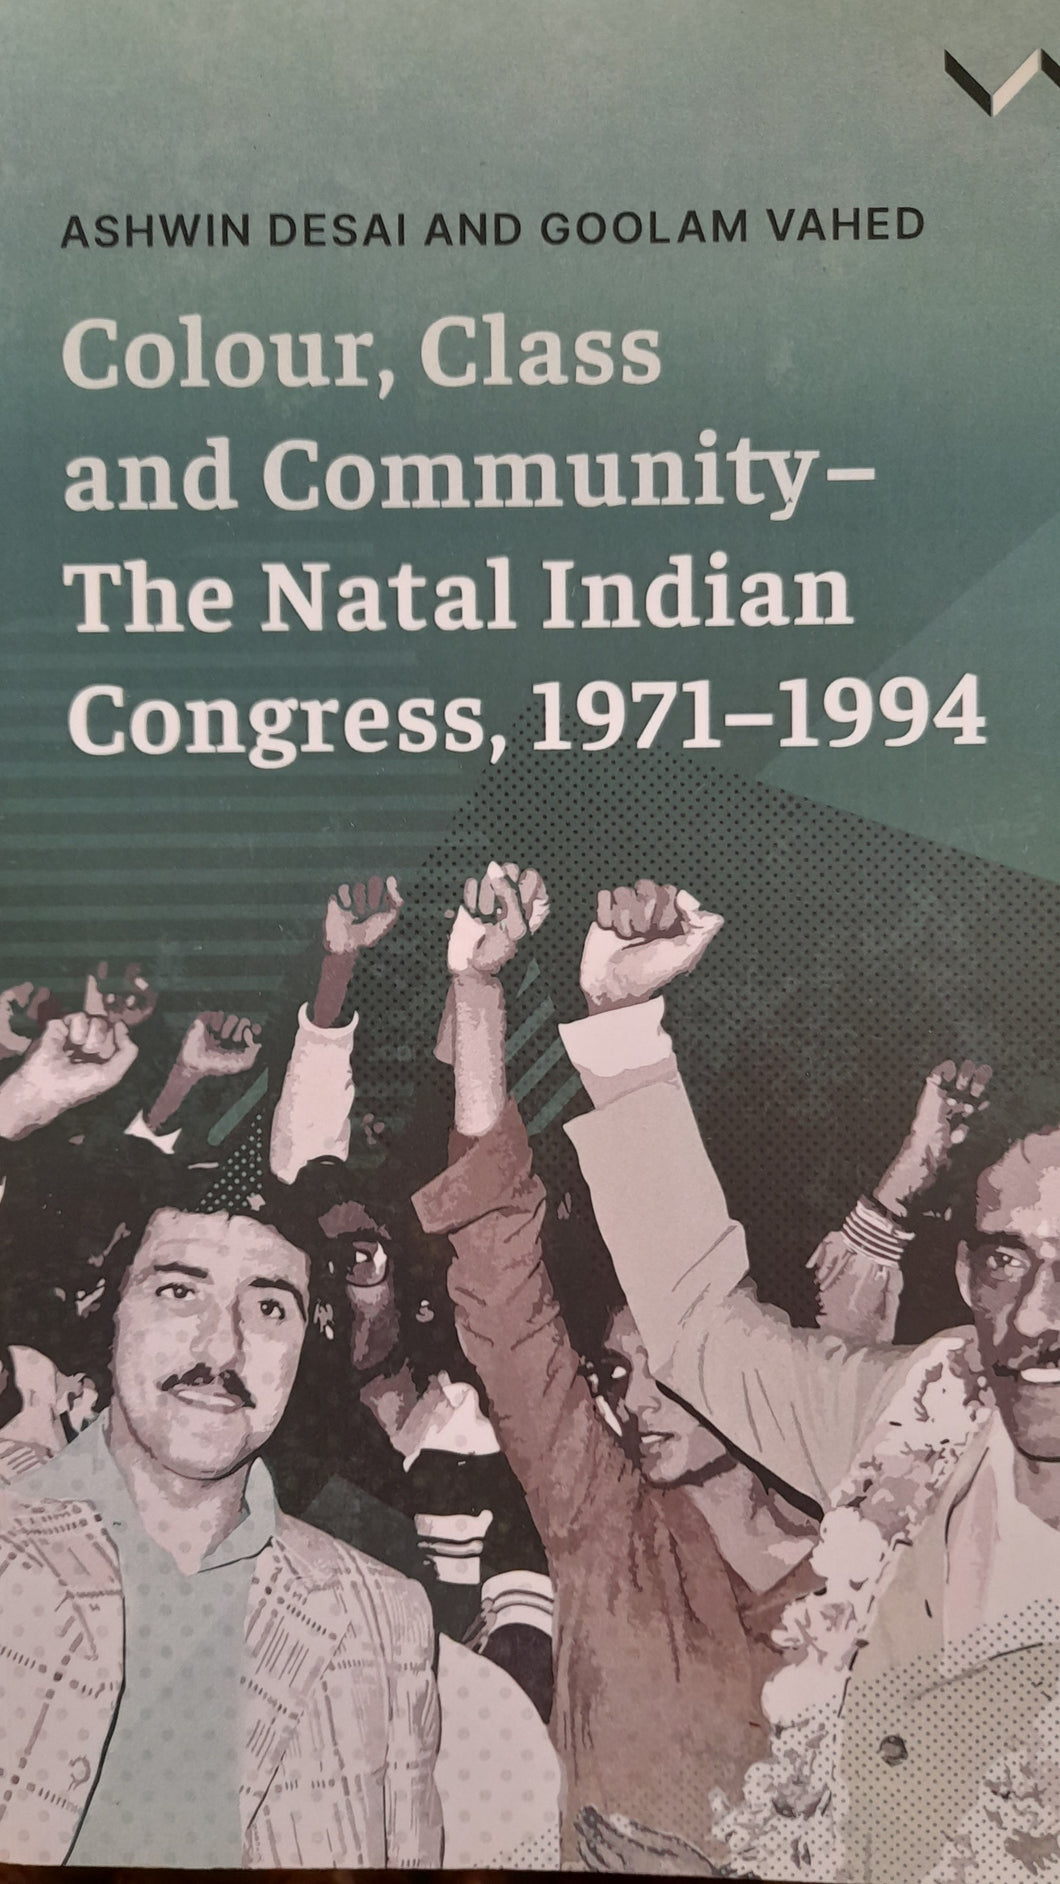 Ashwin Desai and Goolam Vahed - Colour, Class and Community - The Natal Indian Congress, 1971-1994